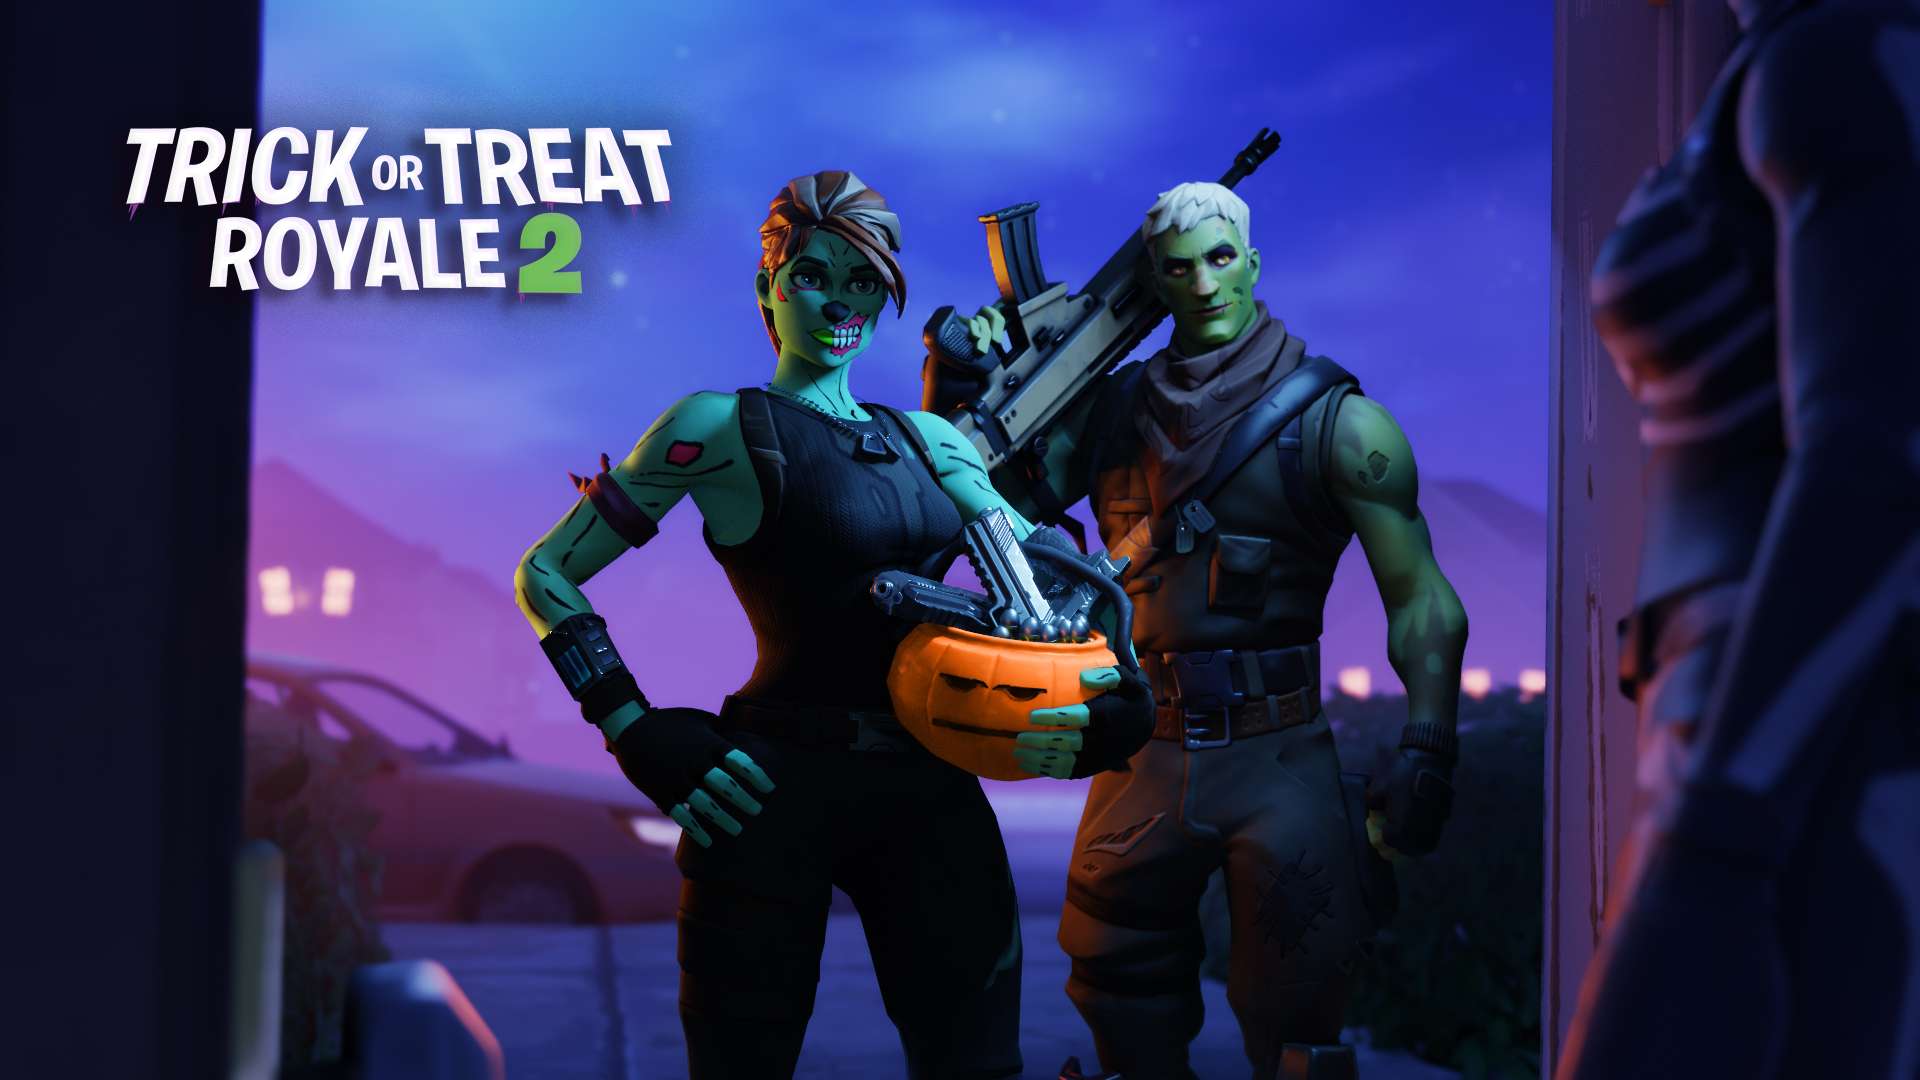 TRICK OR TREAT ROYALE 2